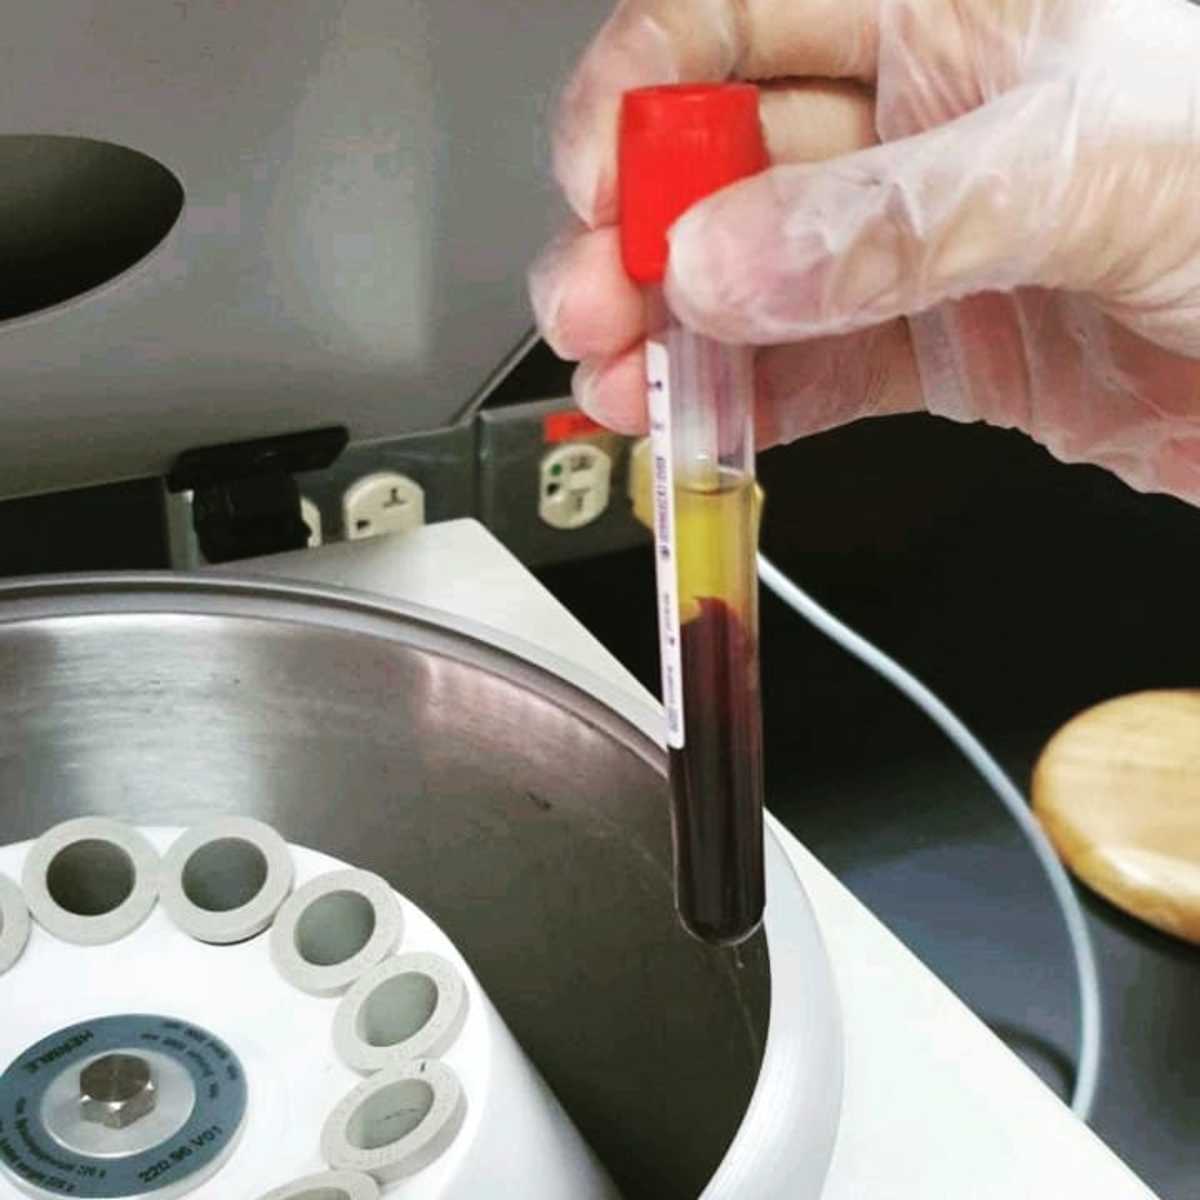 Serum immediately after centrifugation. In this, gel separator is not used hence you don't see a gel layer in the middle.